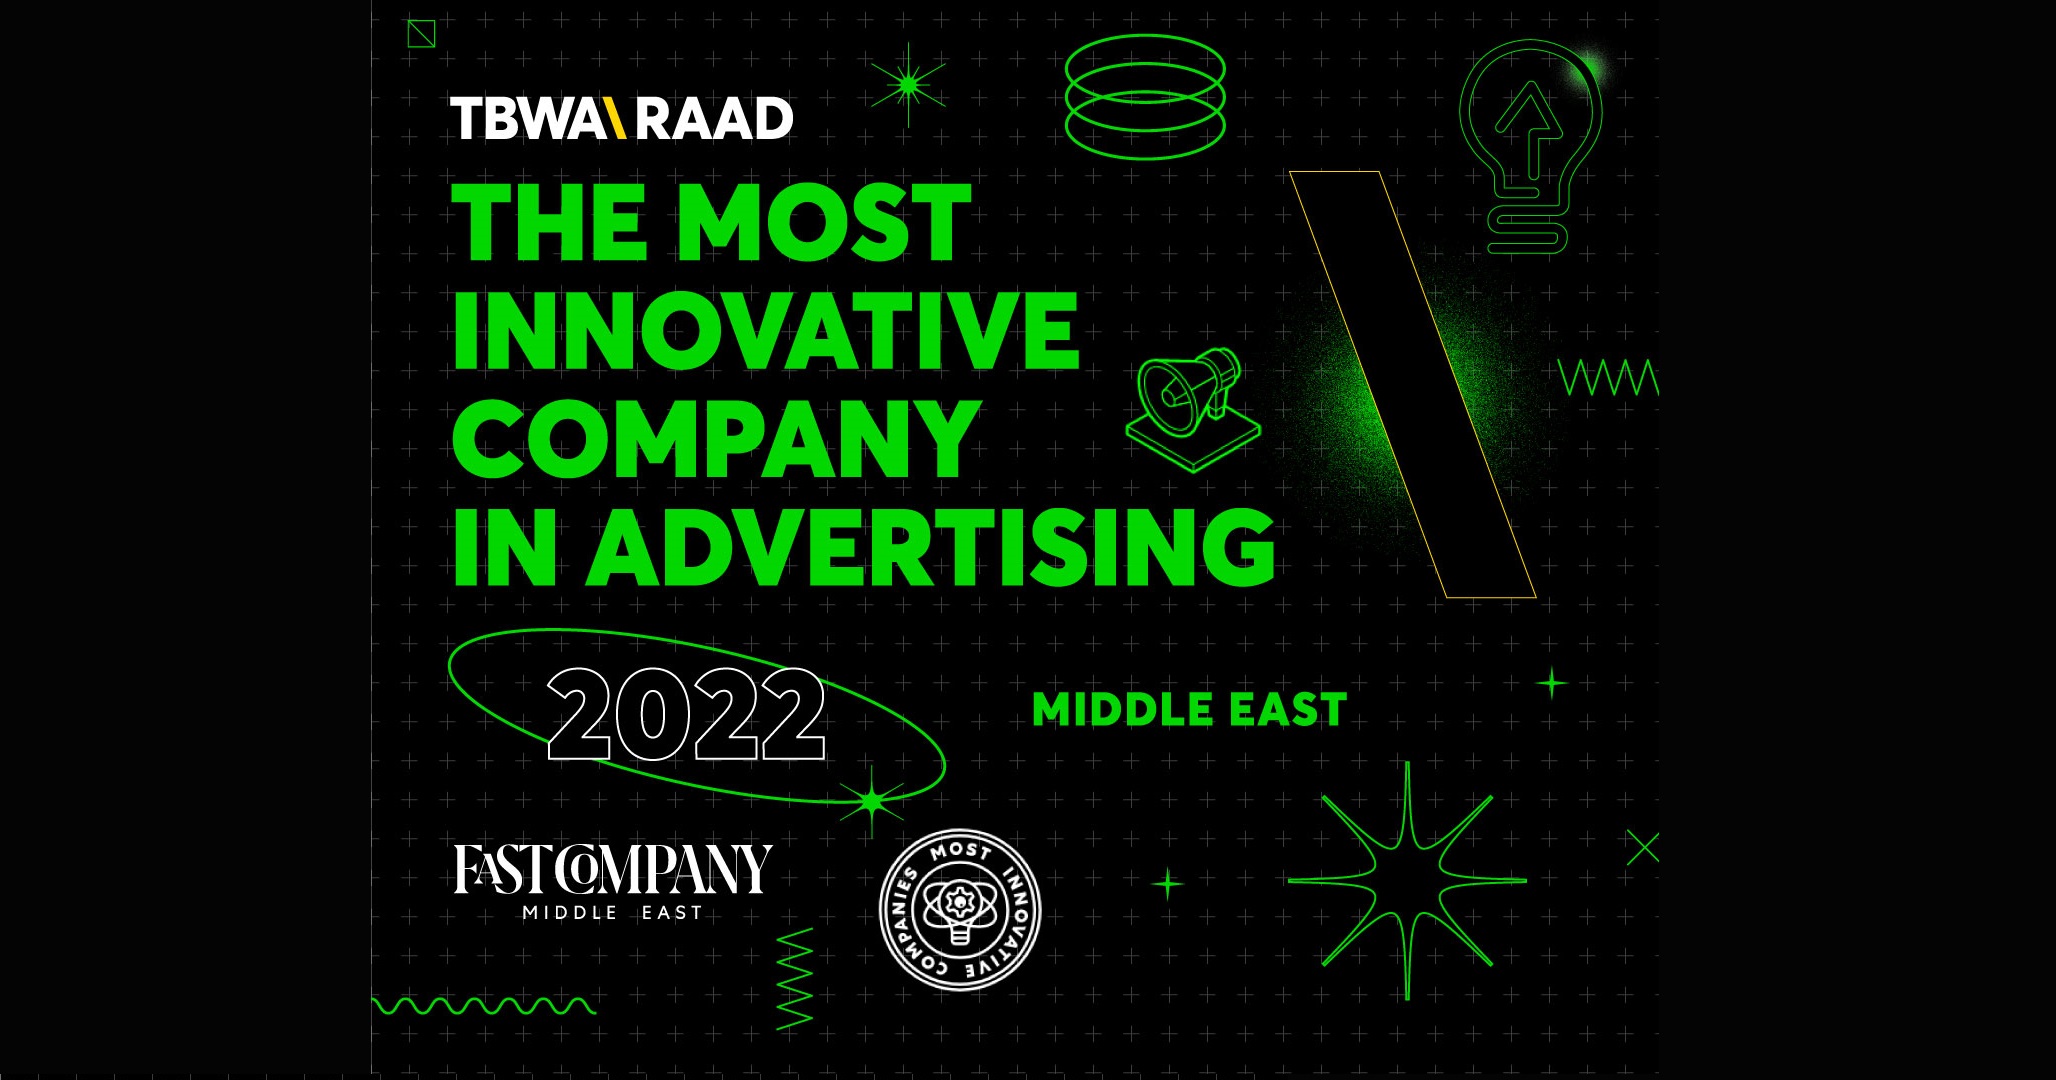 TBWA\Raad Named The Most Innovative Company in Advertising of 2022 by Fast Company Middle East